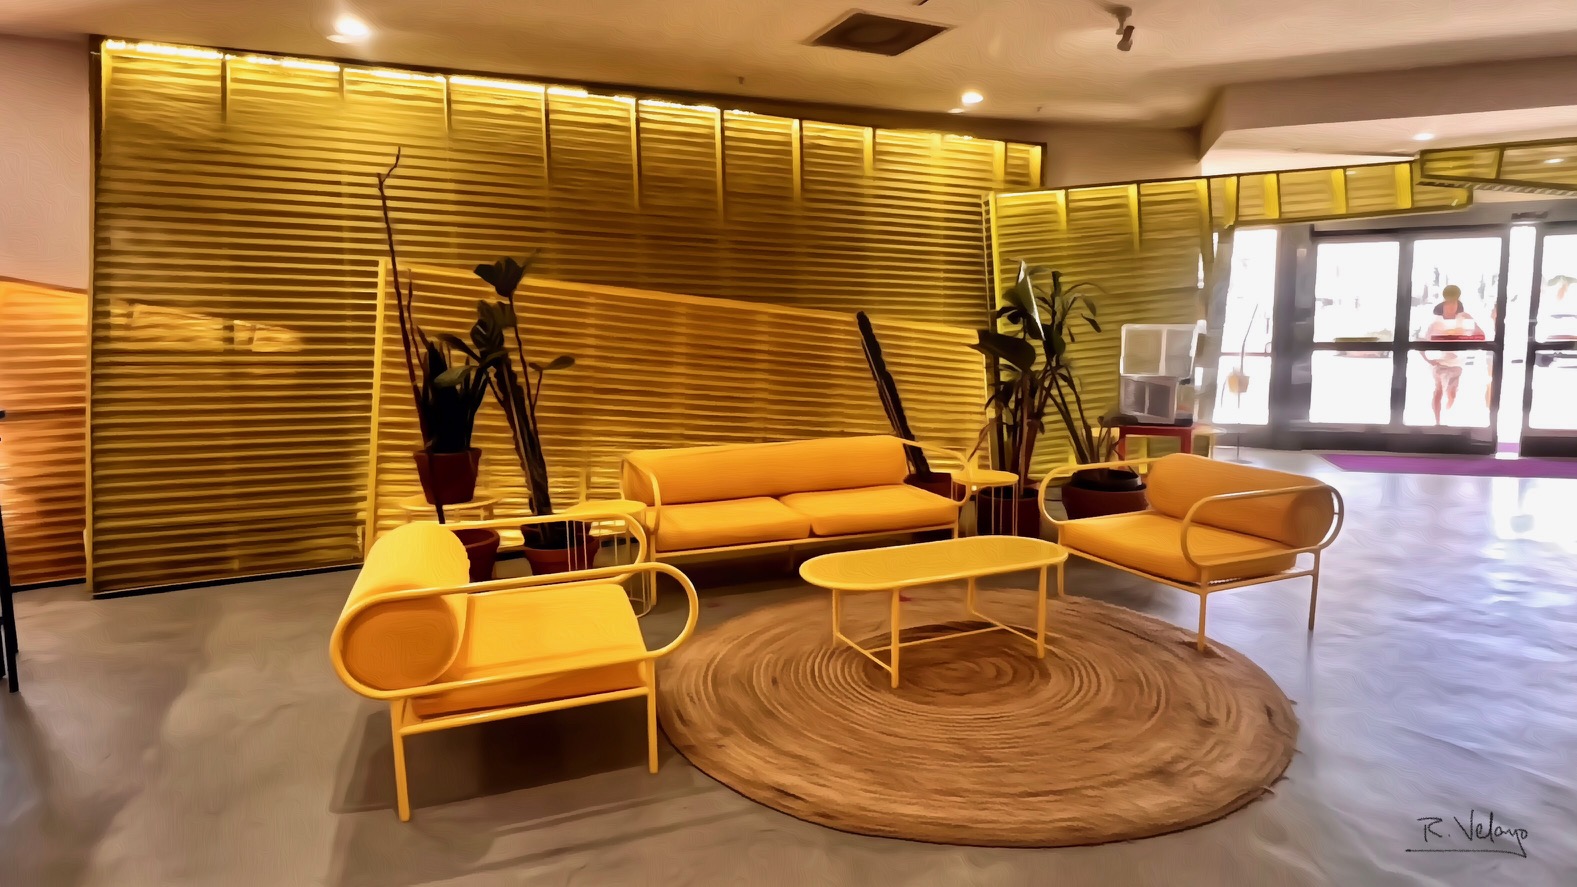 "YELLOW LOUNGE AREA AT THE SAGUARO HOTEL PALM SPRINGS" [Created: 8/11/2023)